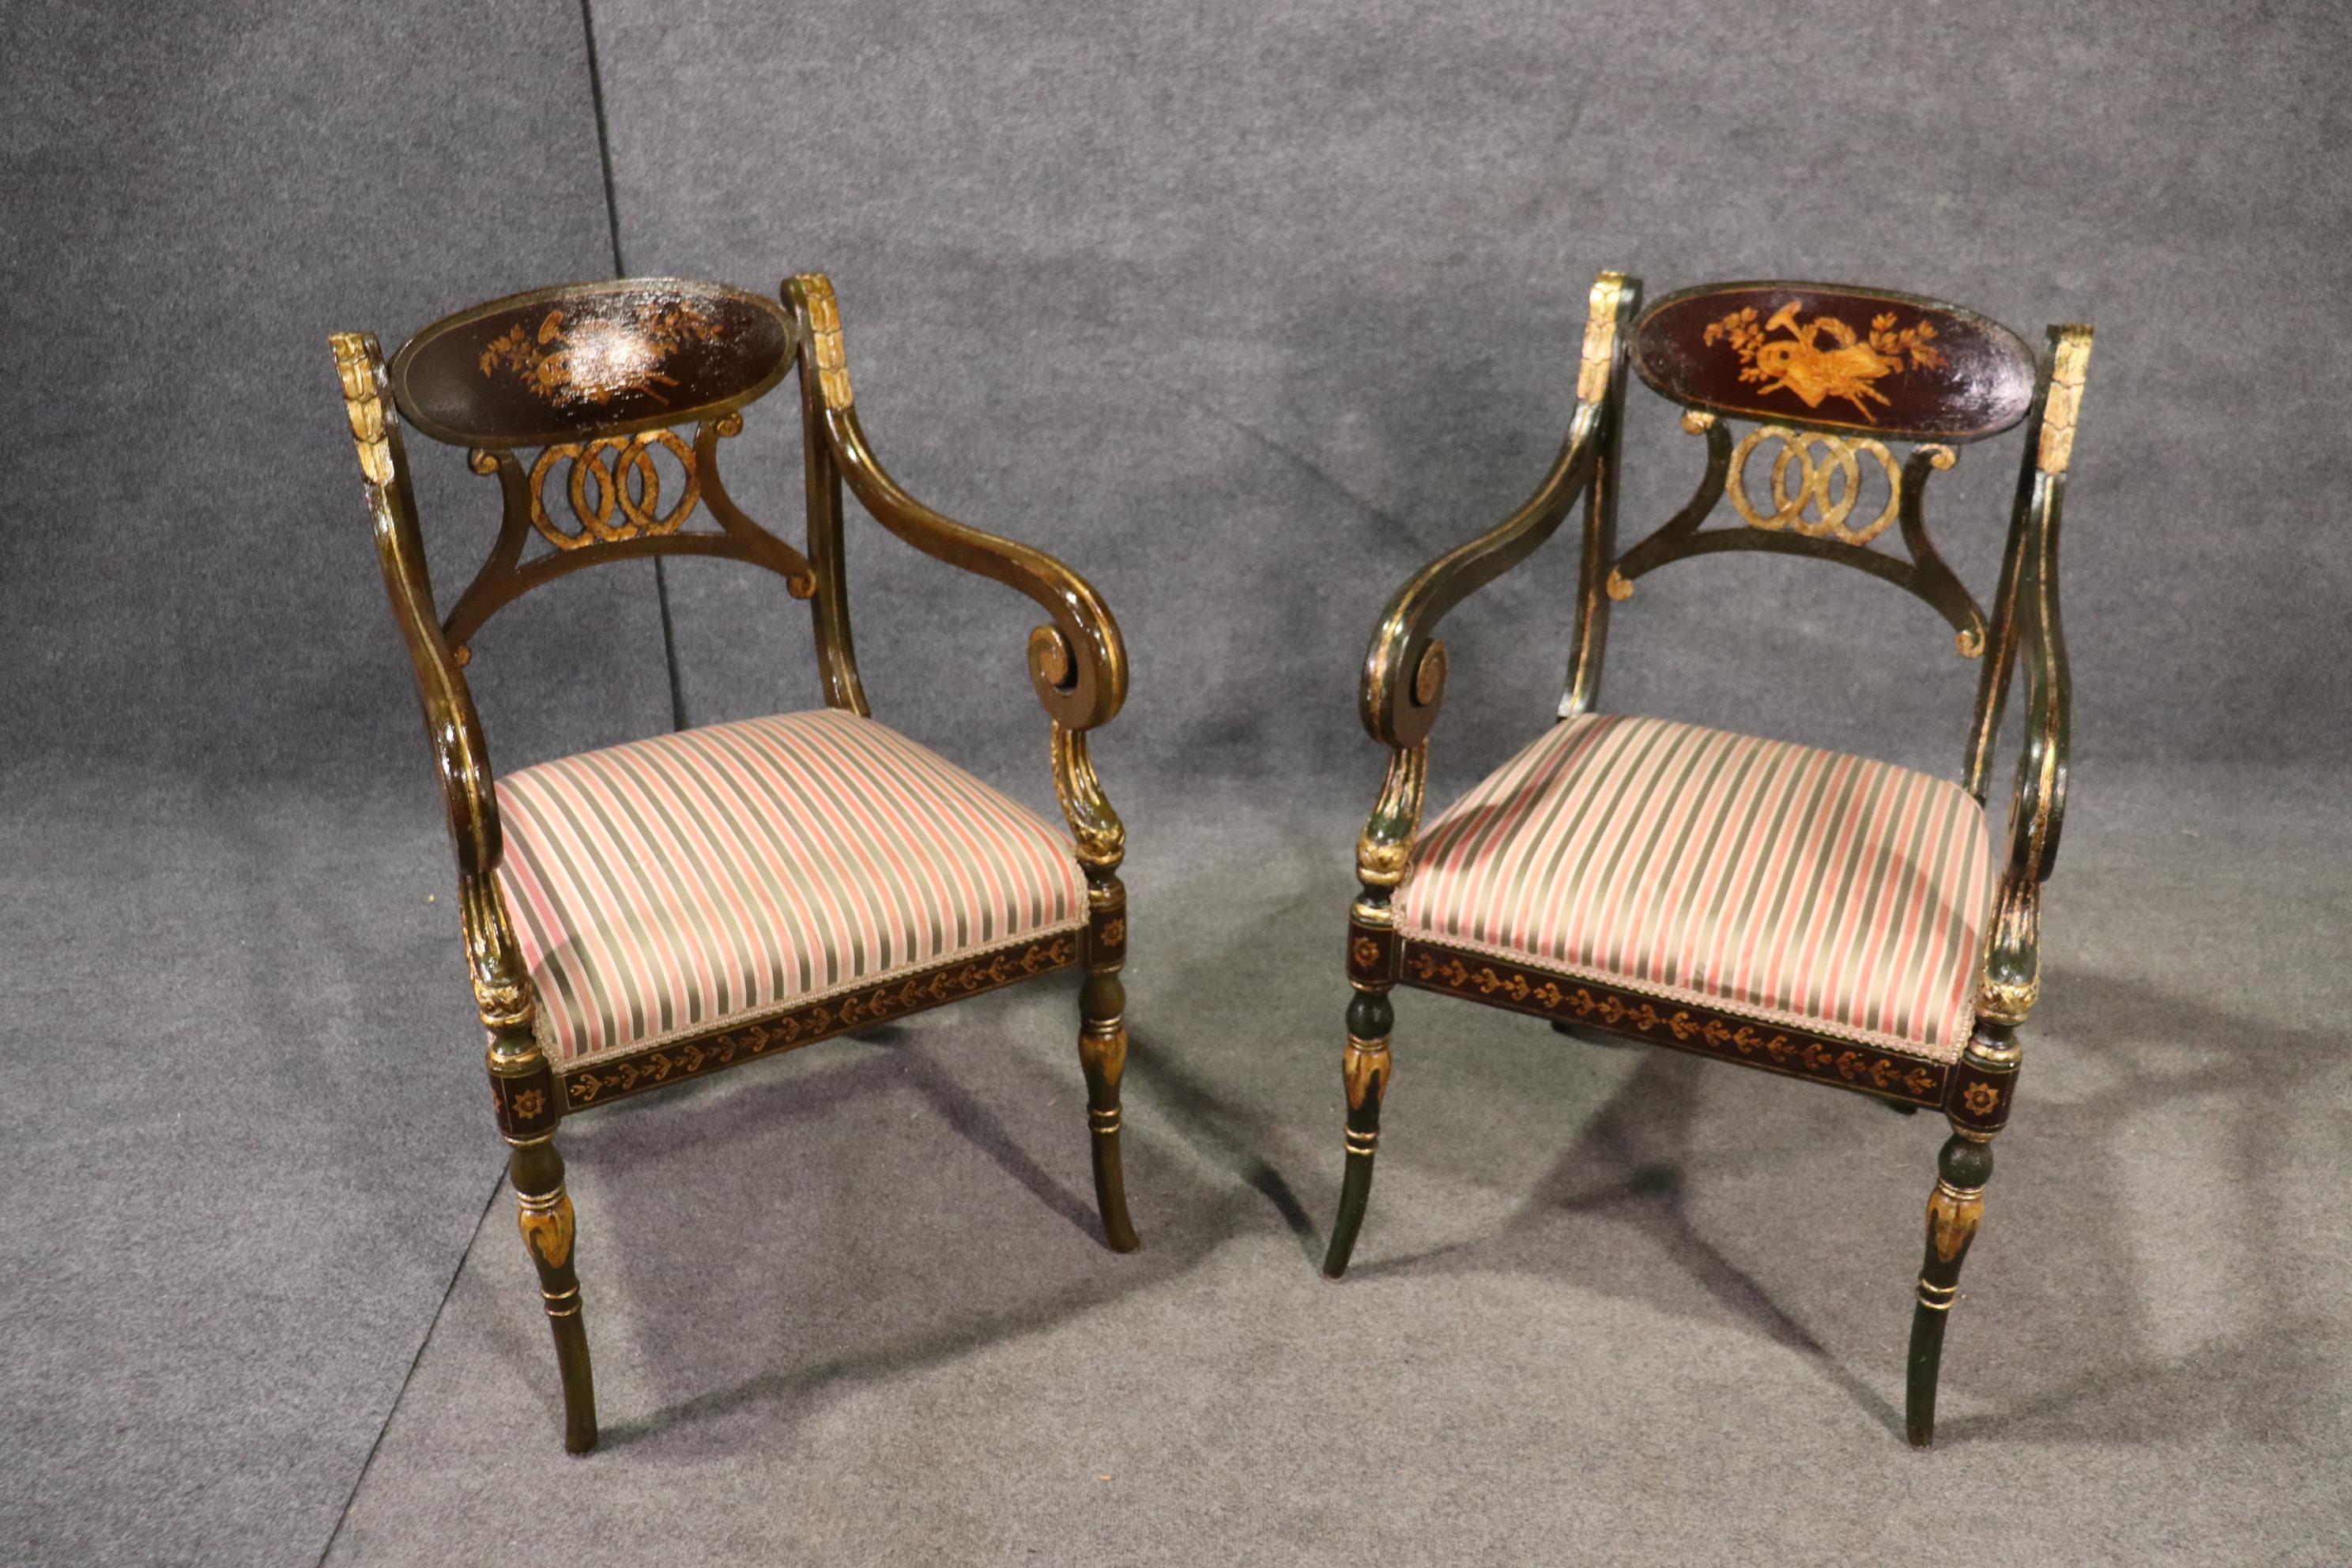 This is a gorgeou set of hand painted and genuine gold leaf gilded Regency dining chairs. They each feature nice upholstered seats and beautiful gold details and muscial instruments as a central motif. They measure 37 tall x 24 wide x 22 deep and